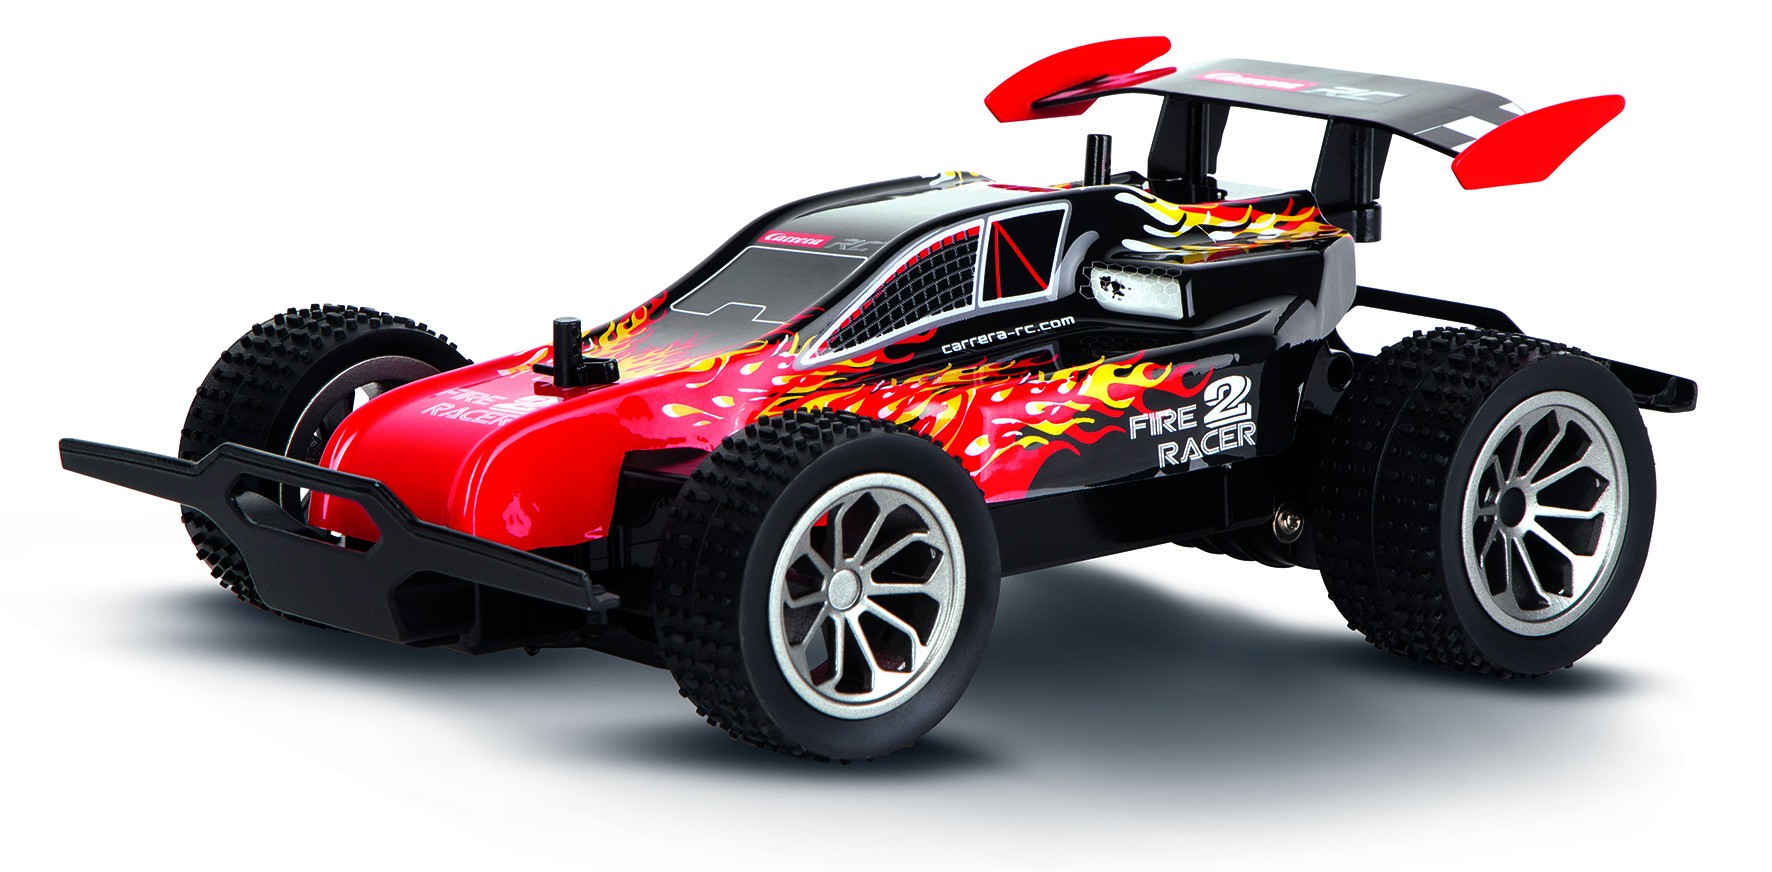 Buggy Carrera Fire Racer 2- 1/20 - Buggy rc